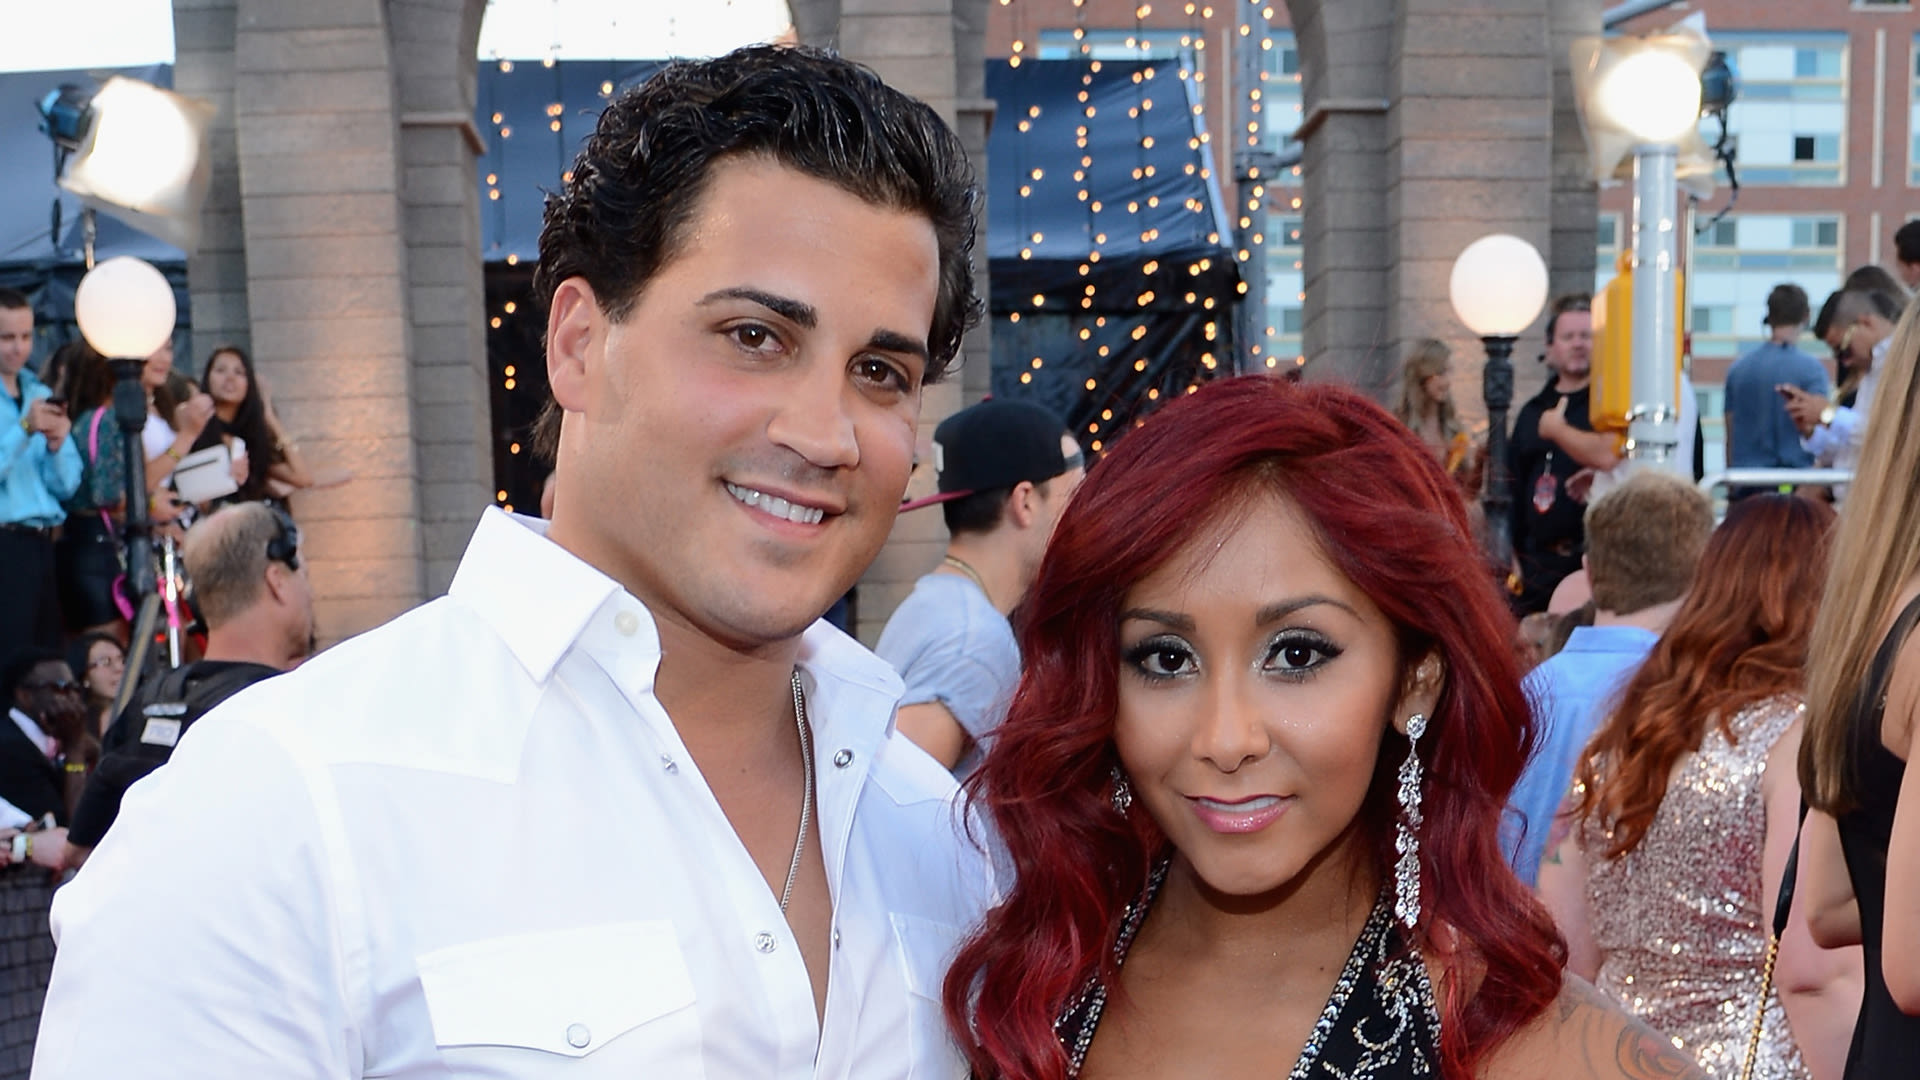 Couples who stayed after Ashley Madison scandal from Duggars to Snooki & Jionni